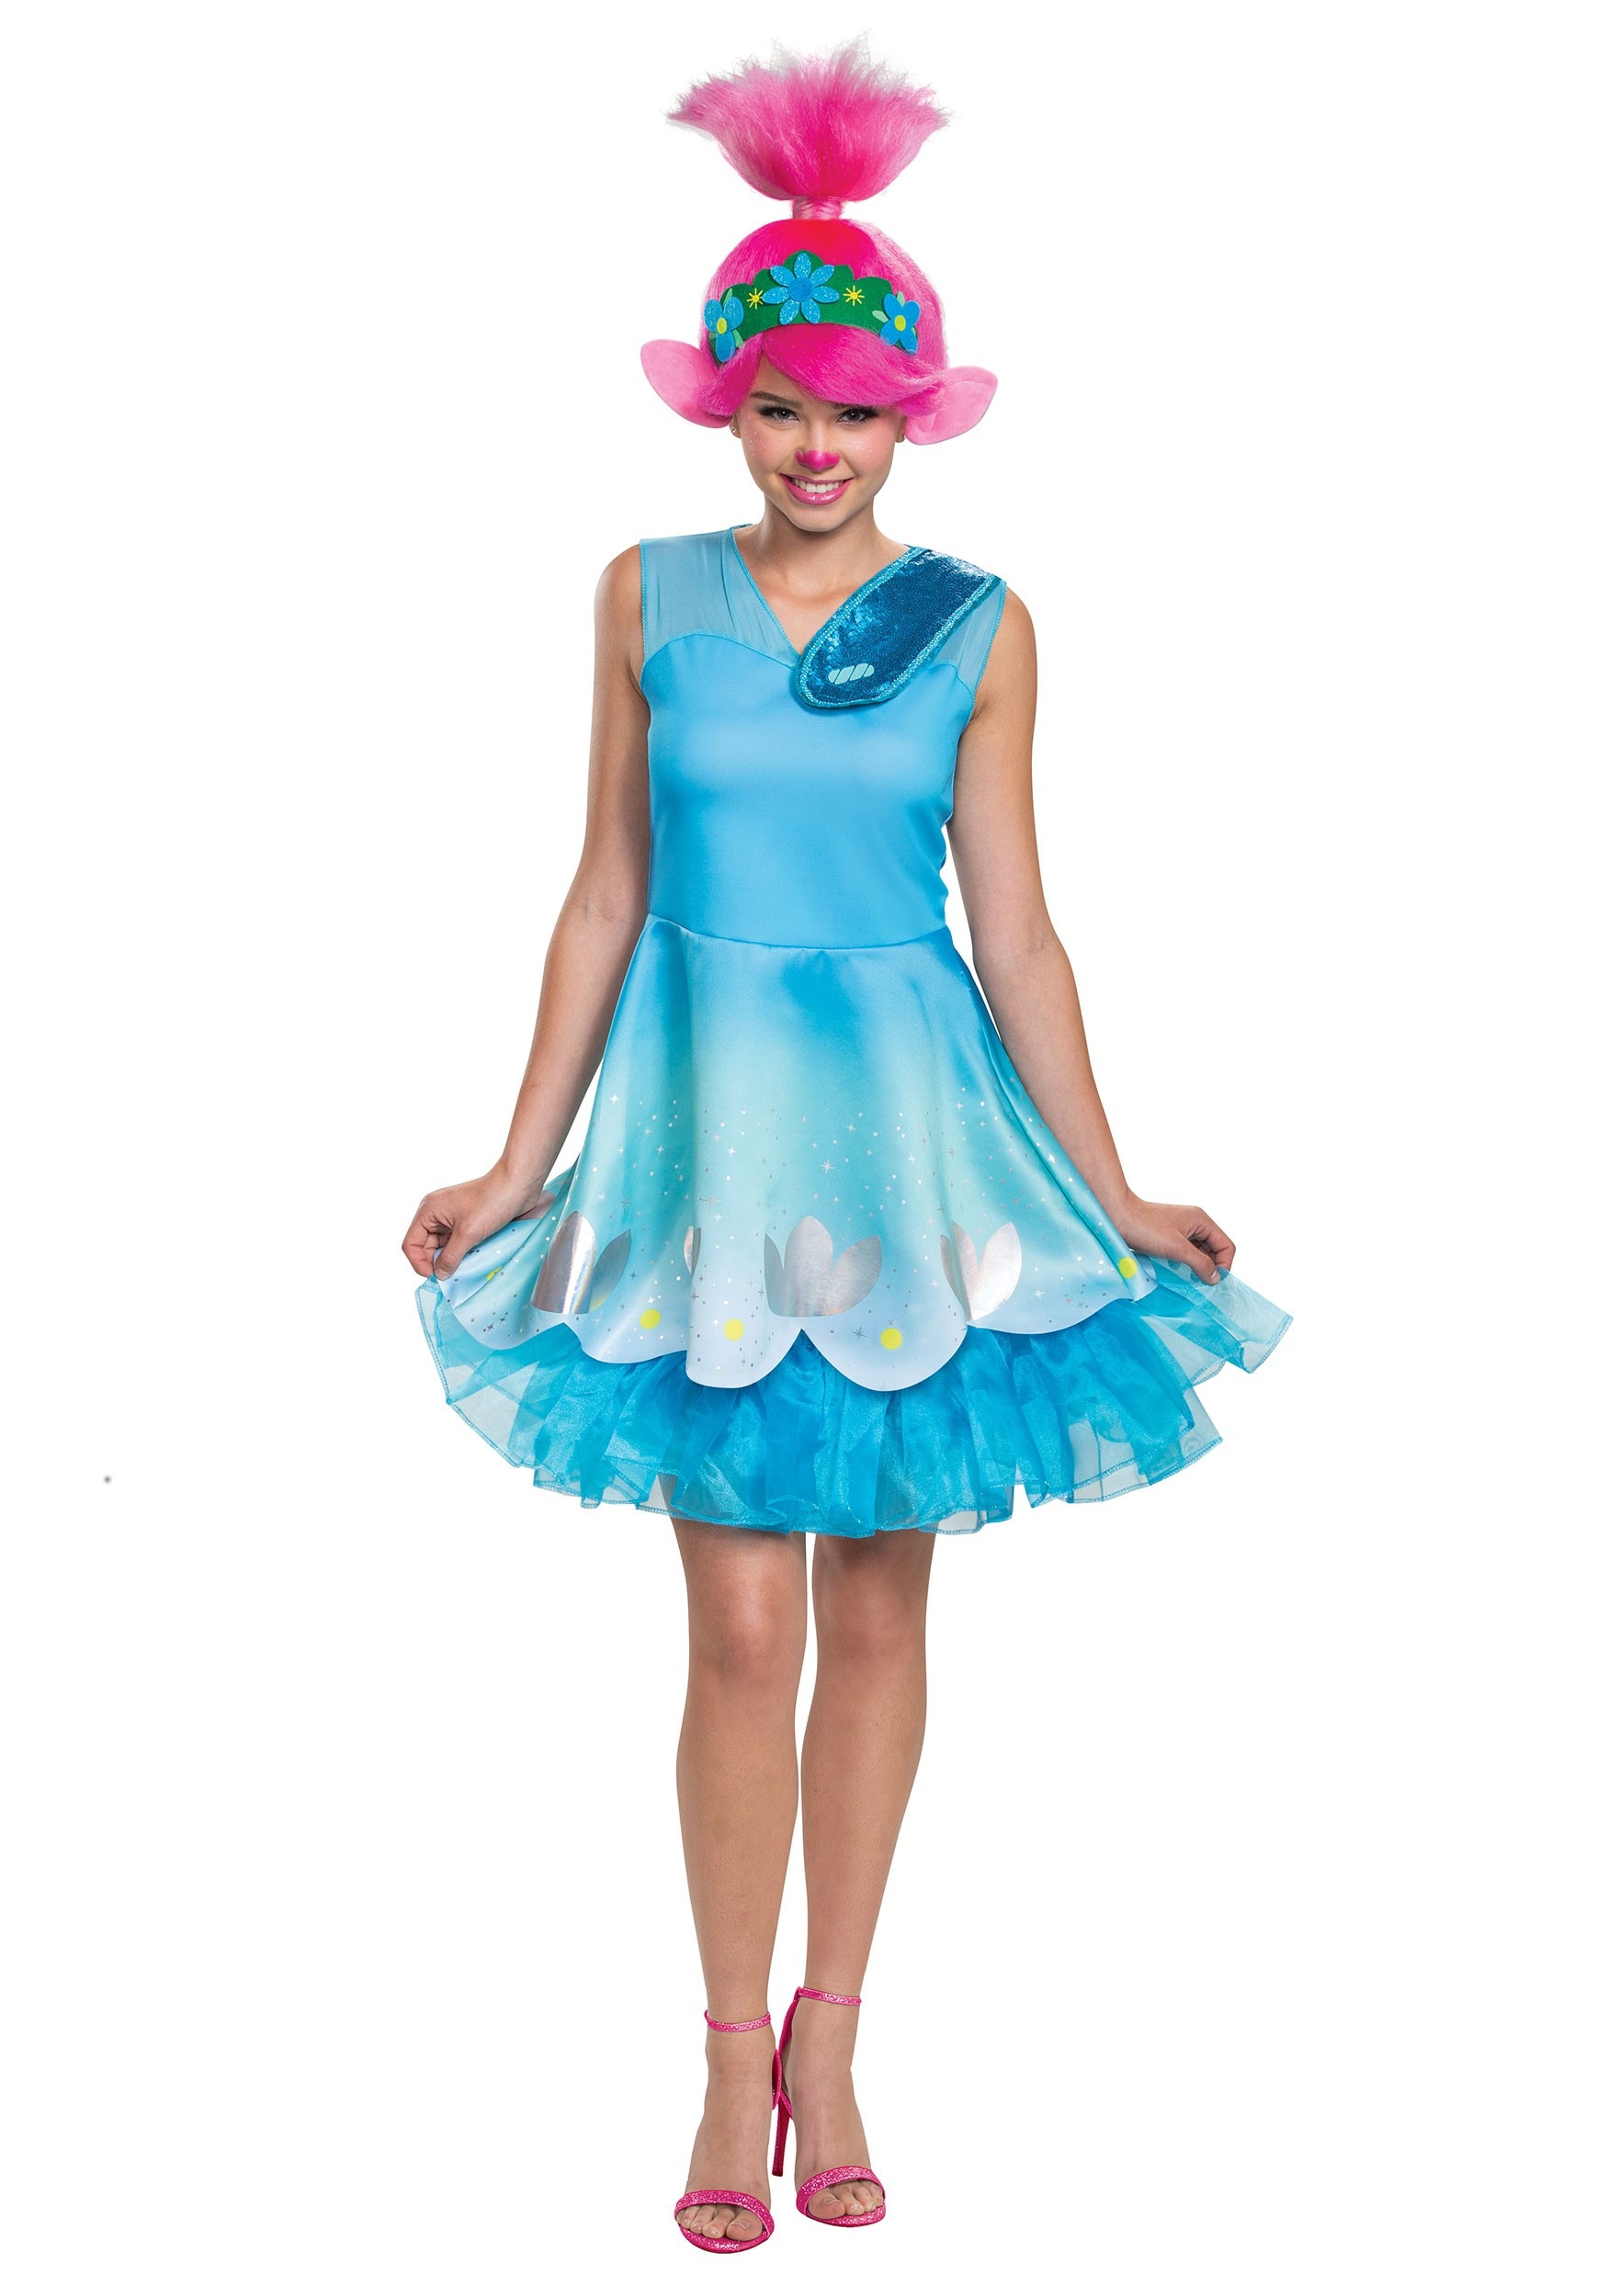 Adult Outfit Cosplay Poppy Mascot Costume Trolls Princess Parade Fancy Dress